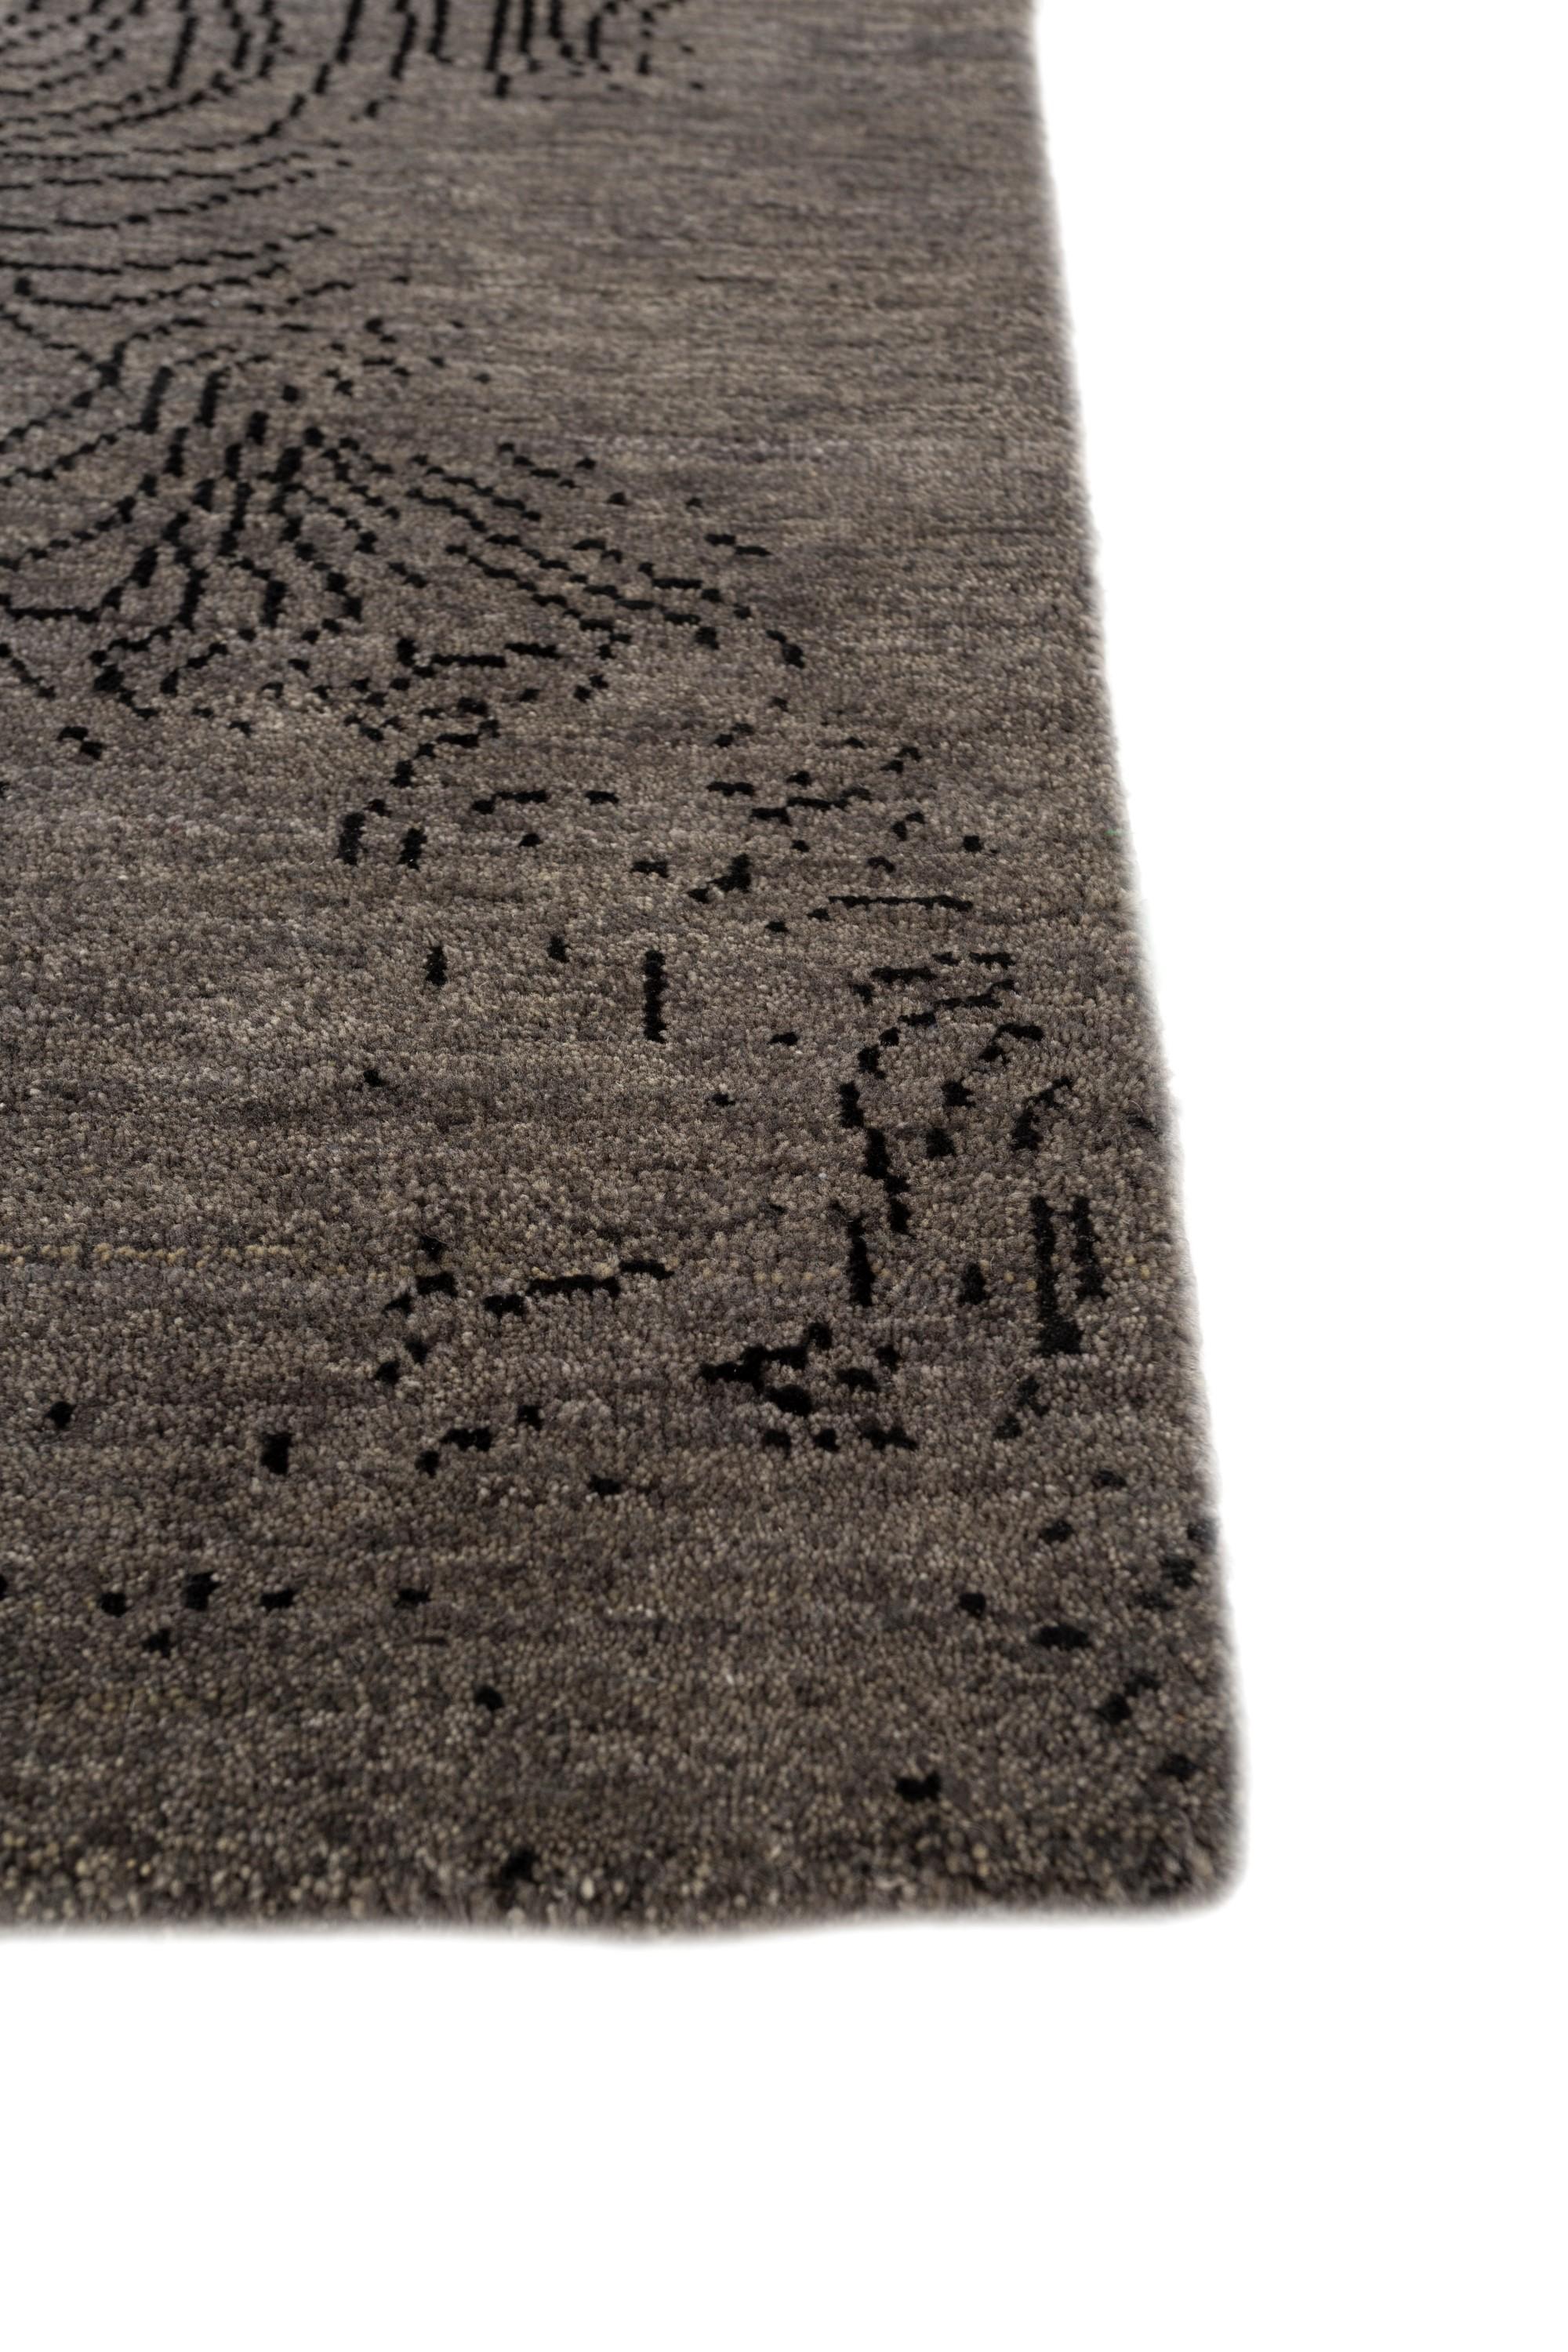 Introducing the Modern Rug  – a masterpiece hand-knotted with precision in rural India. Crafted from a blend of luxurious wool and bamboo silk, this handknotted rug seamlessly combines modern designs with traditional craftsmanship. The mesh textures